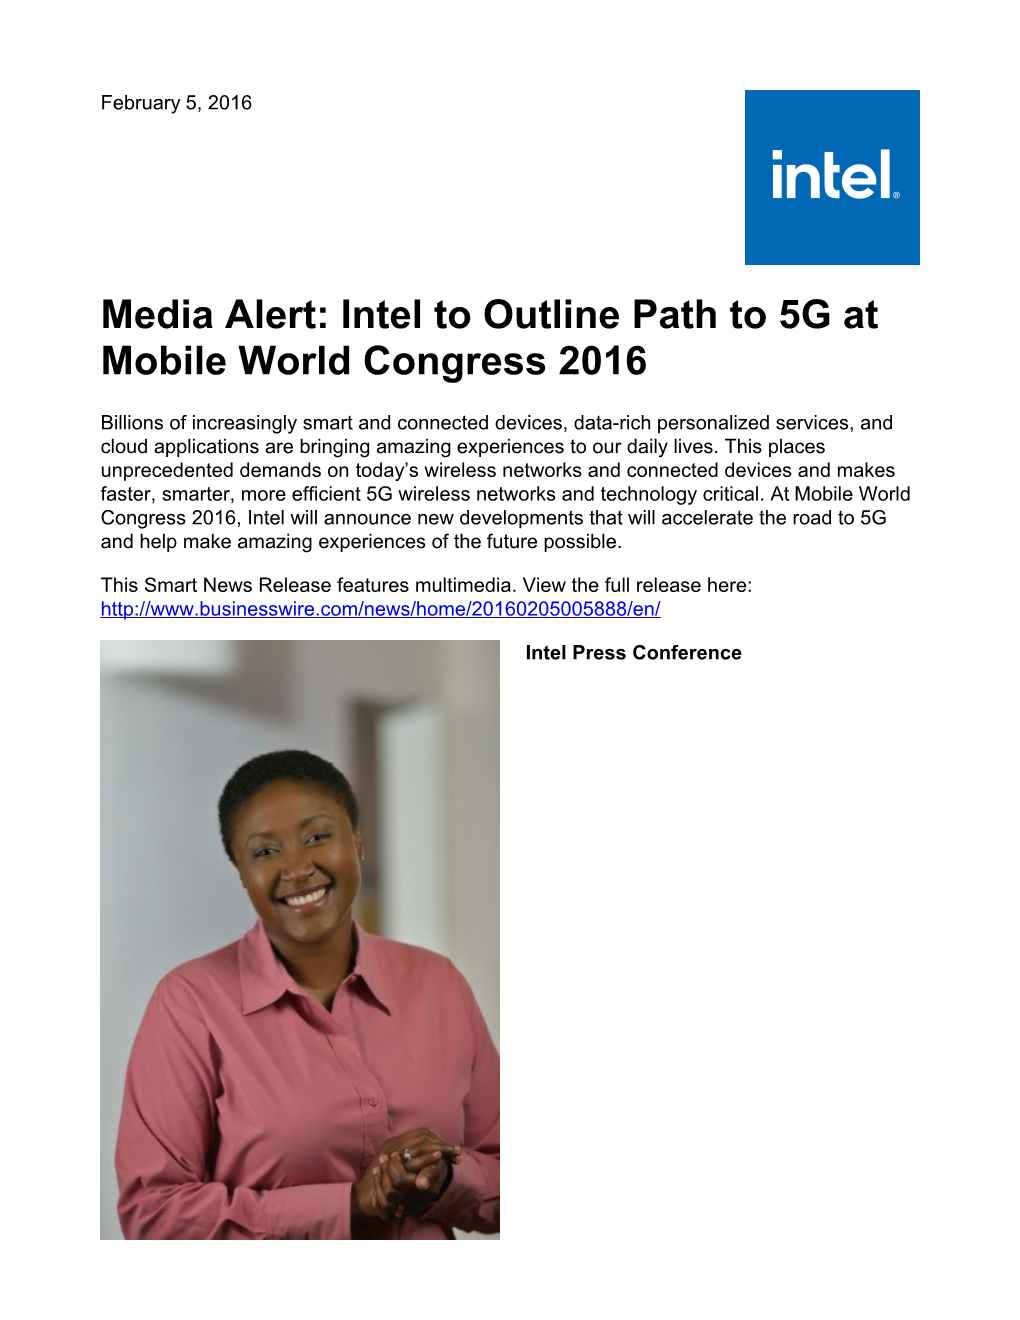 Media Alert: Intel to Outline Path to 5G at Mobile World Congress 2016